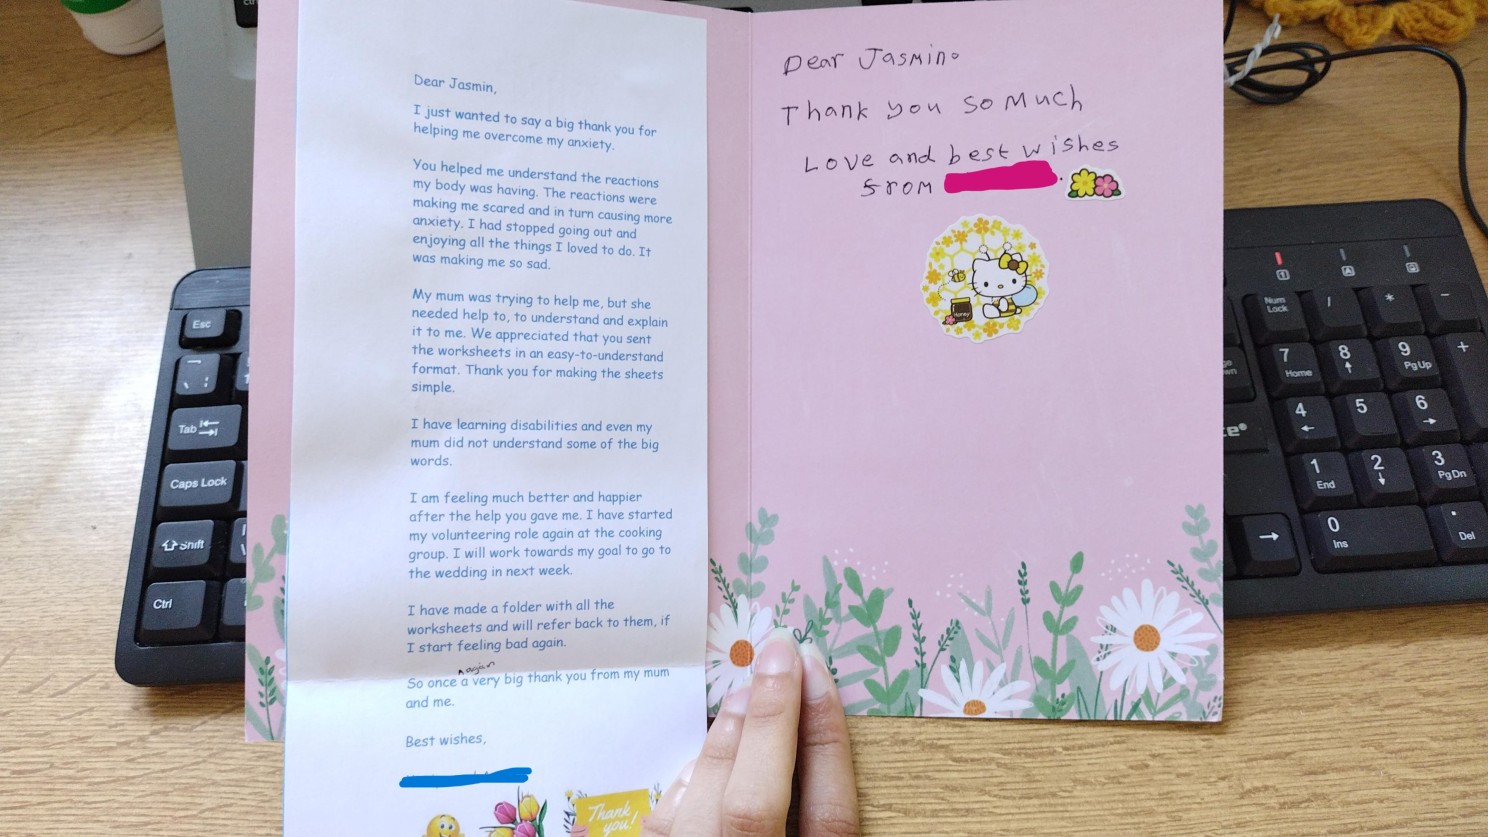 a letter written by a service user to Jasmin